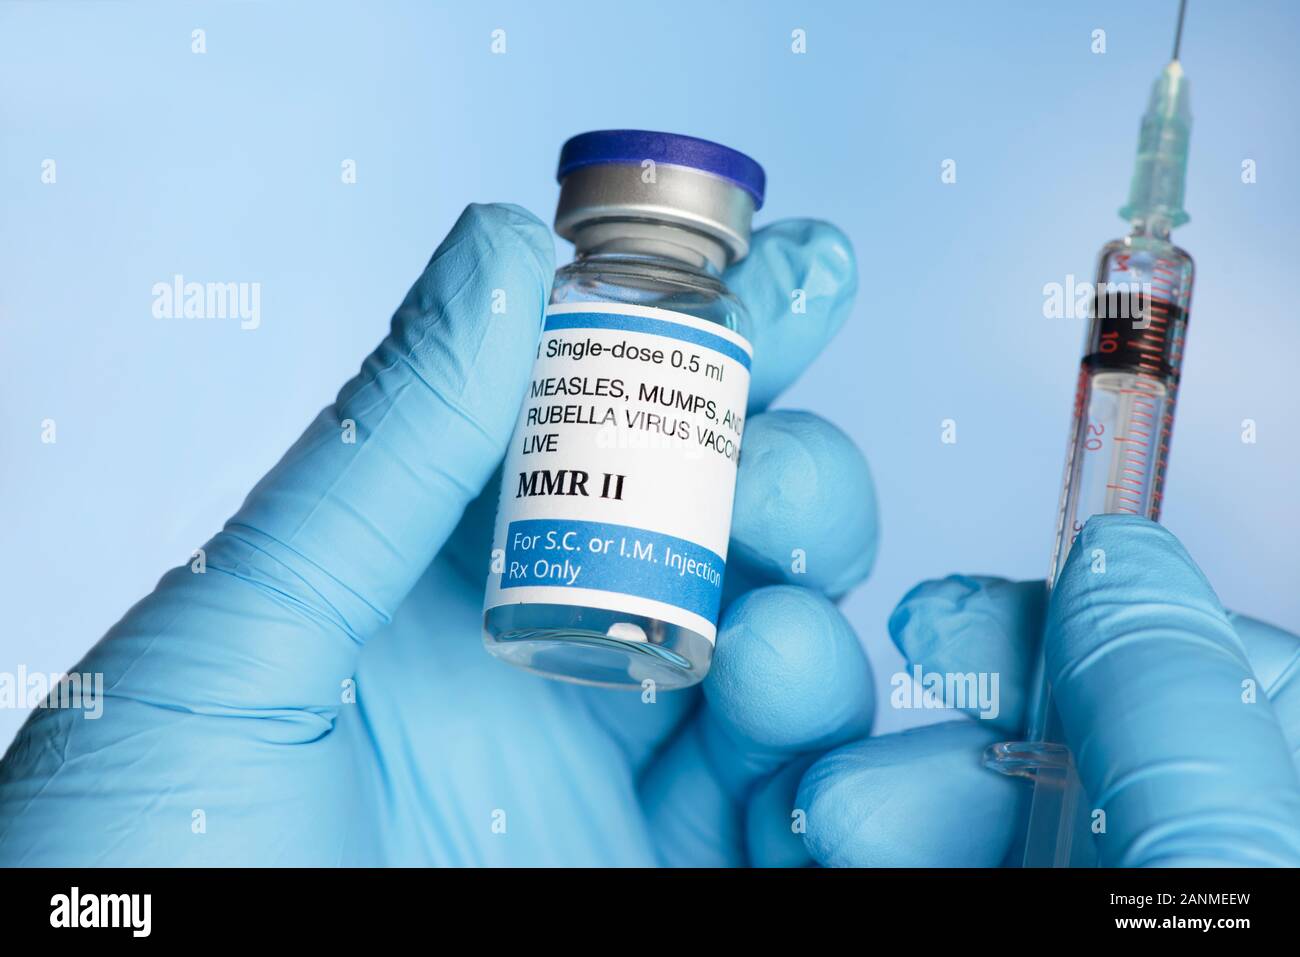 Nurse holds MMR 2 -measles, mumps, rubella vaccine vial in gloved hand with syringe. Stock Photo